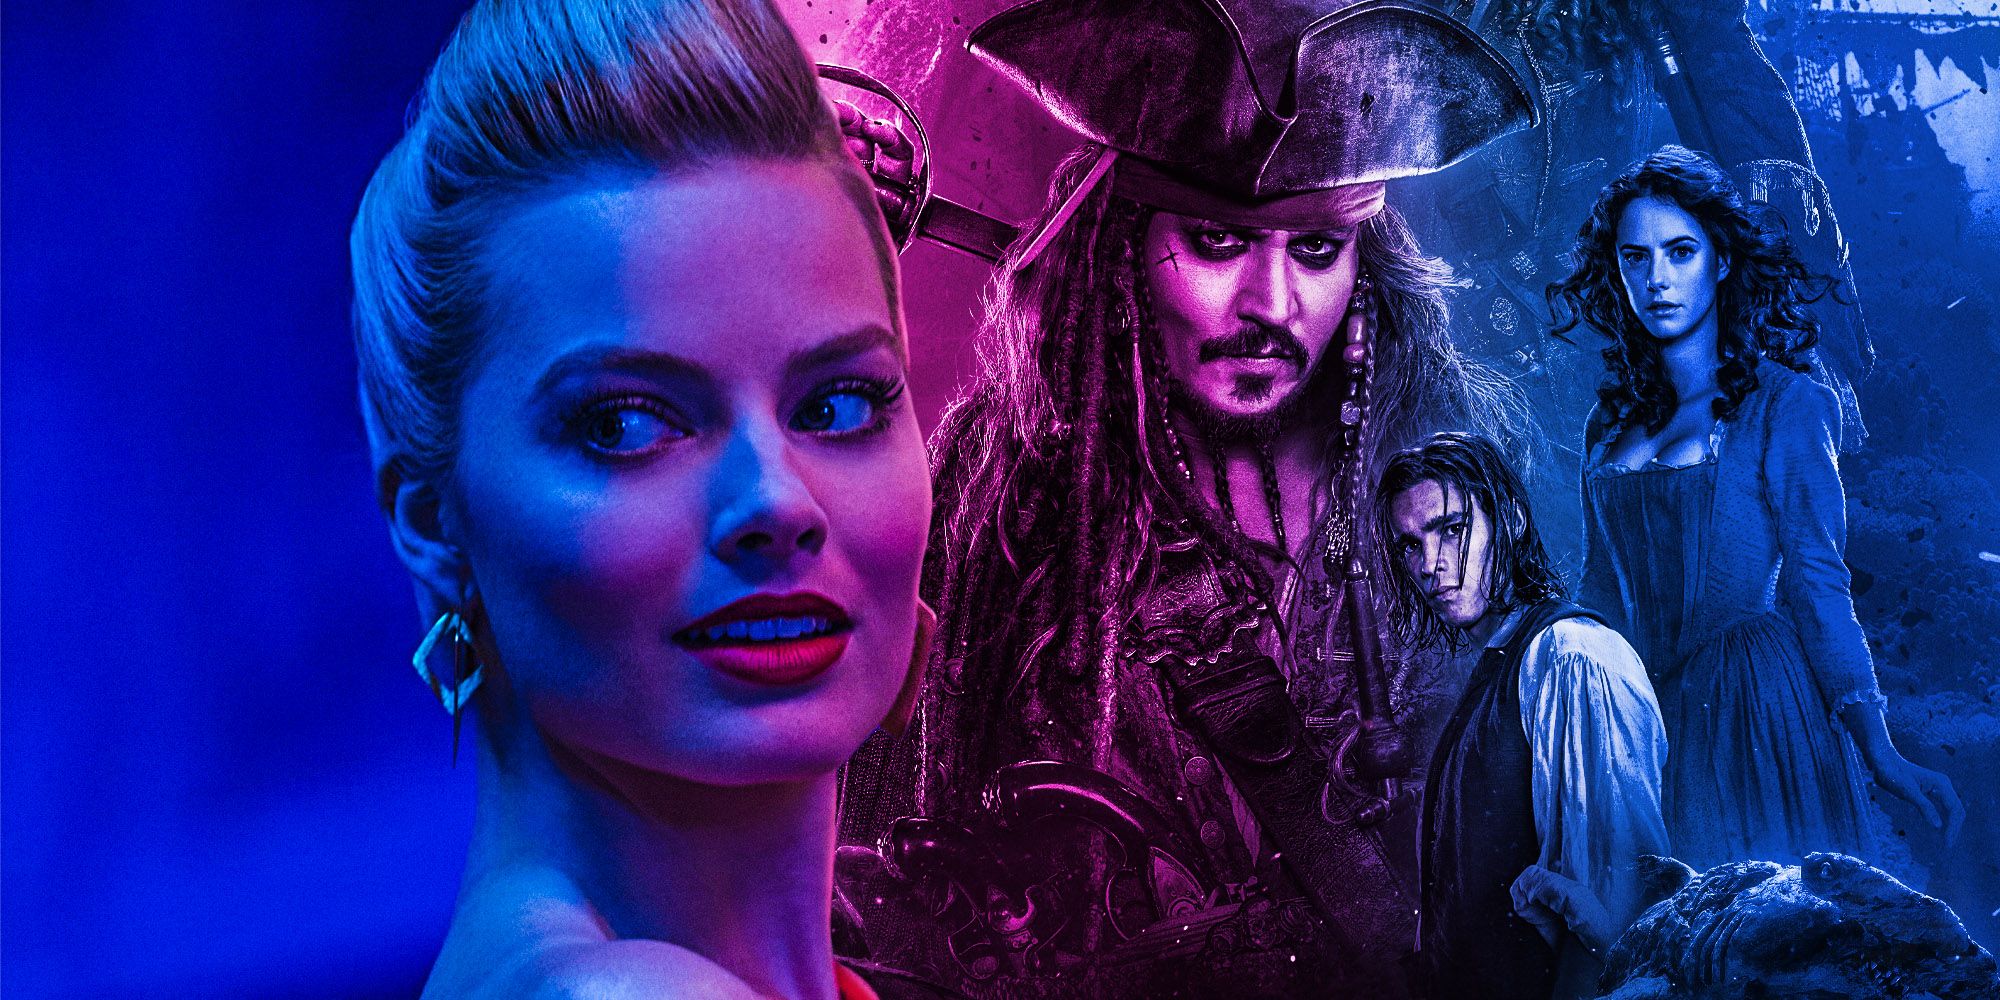 Margot Robbie Pirates of the Caribbean spinoff